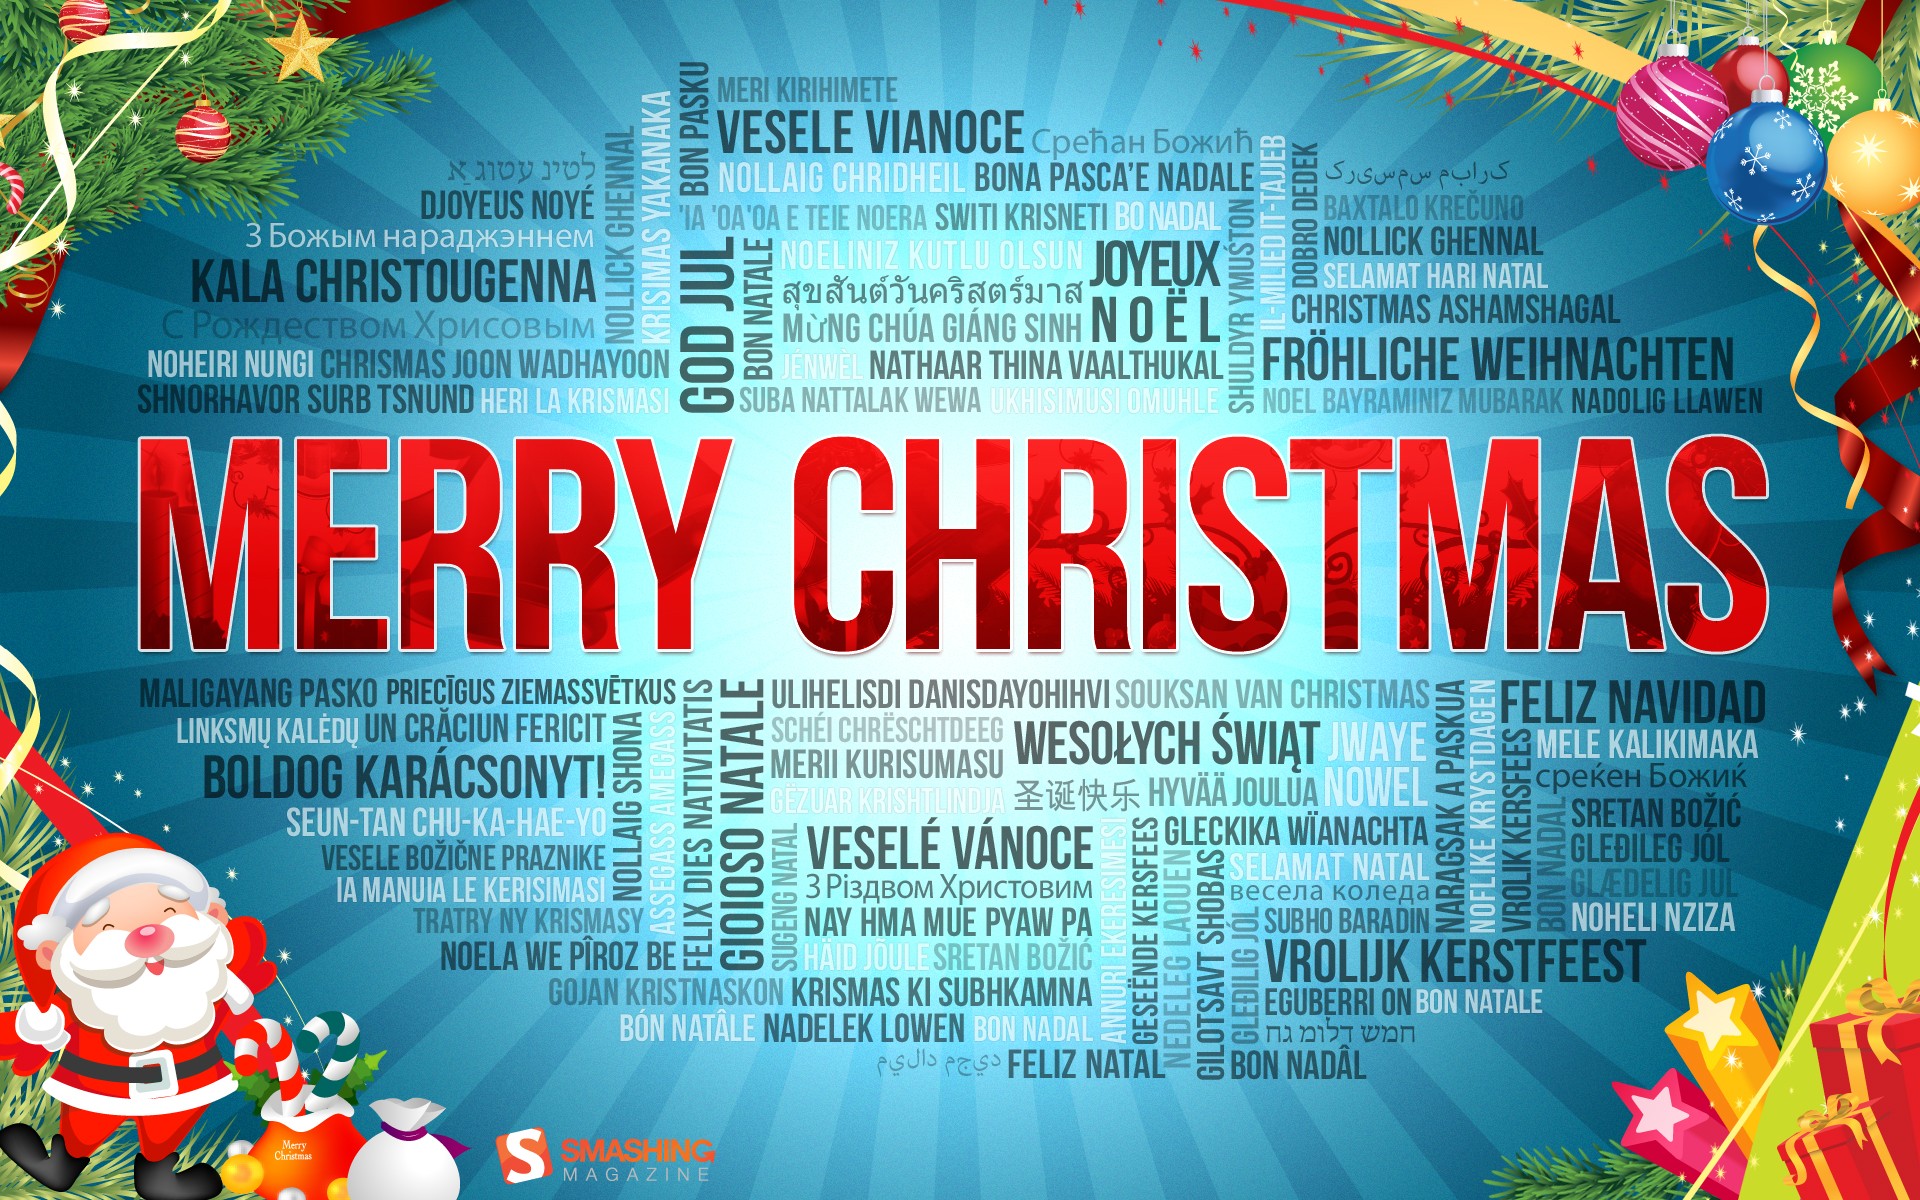 download-wallpapers-merry-christmas-different-languages-new-year